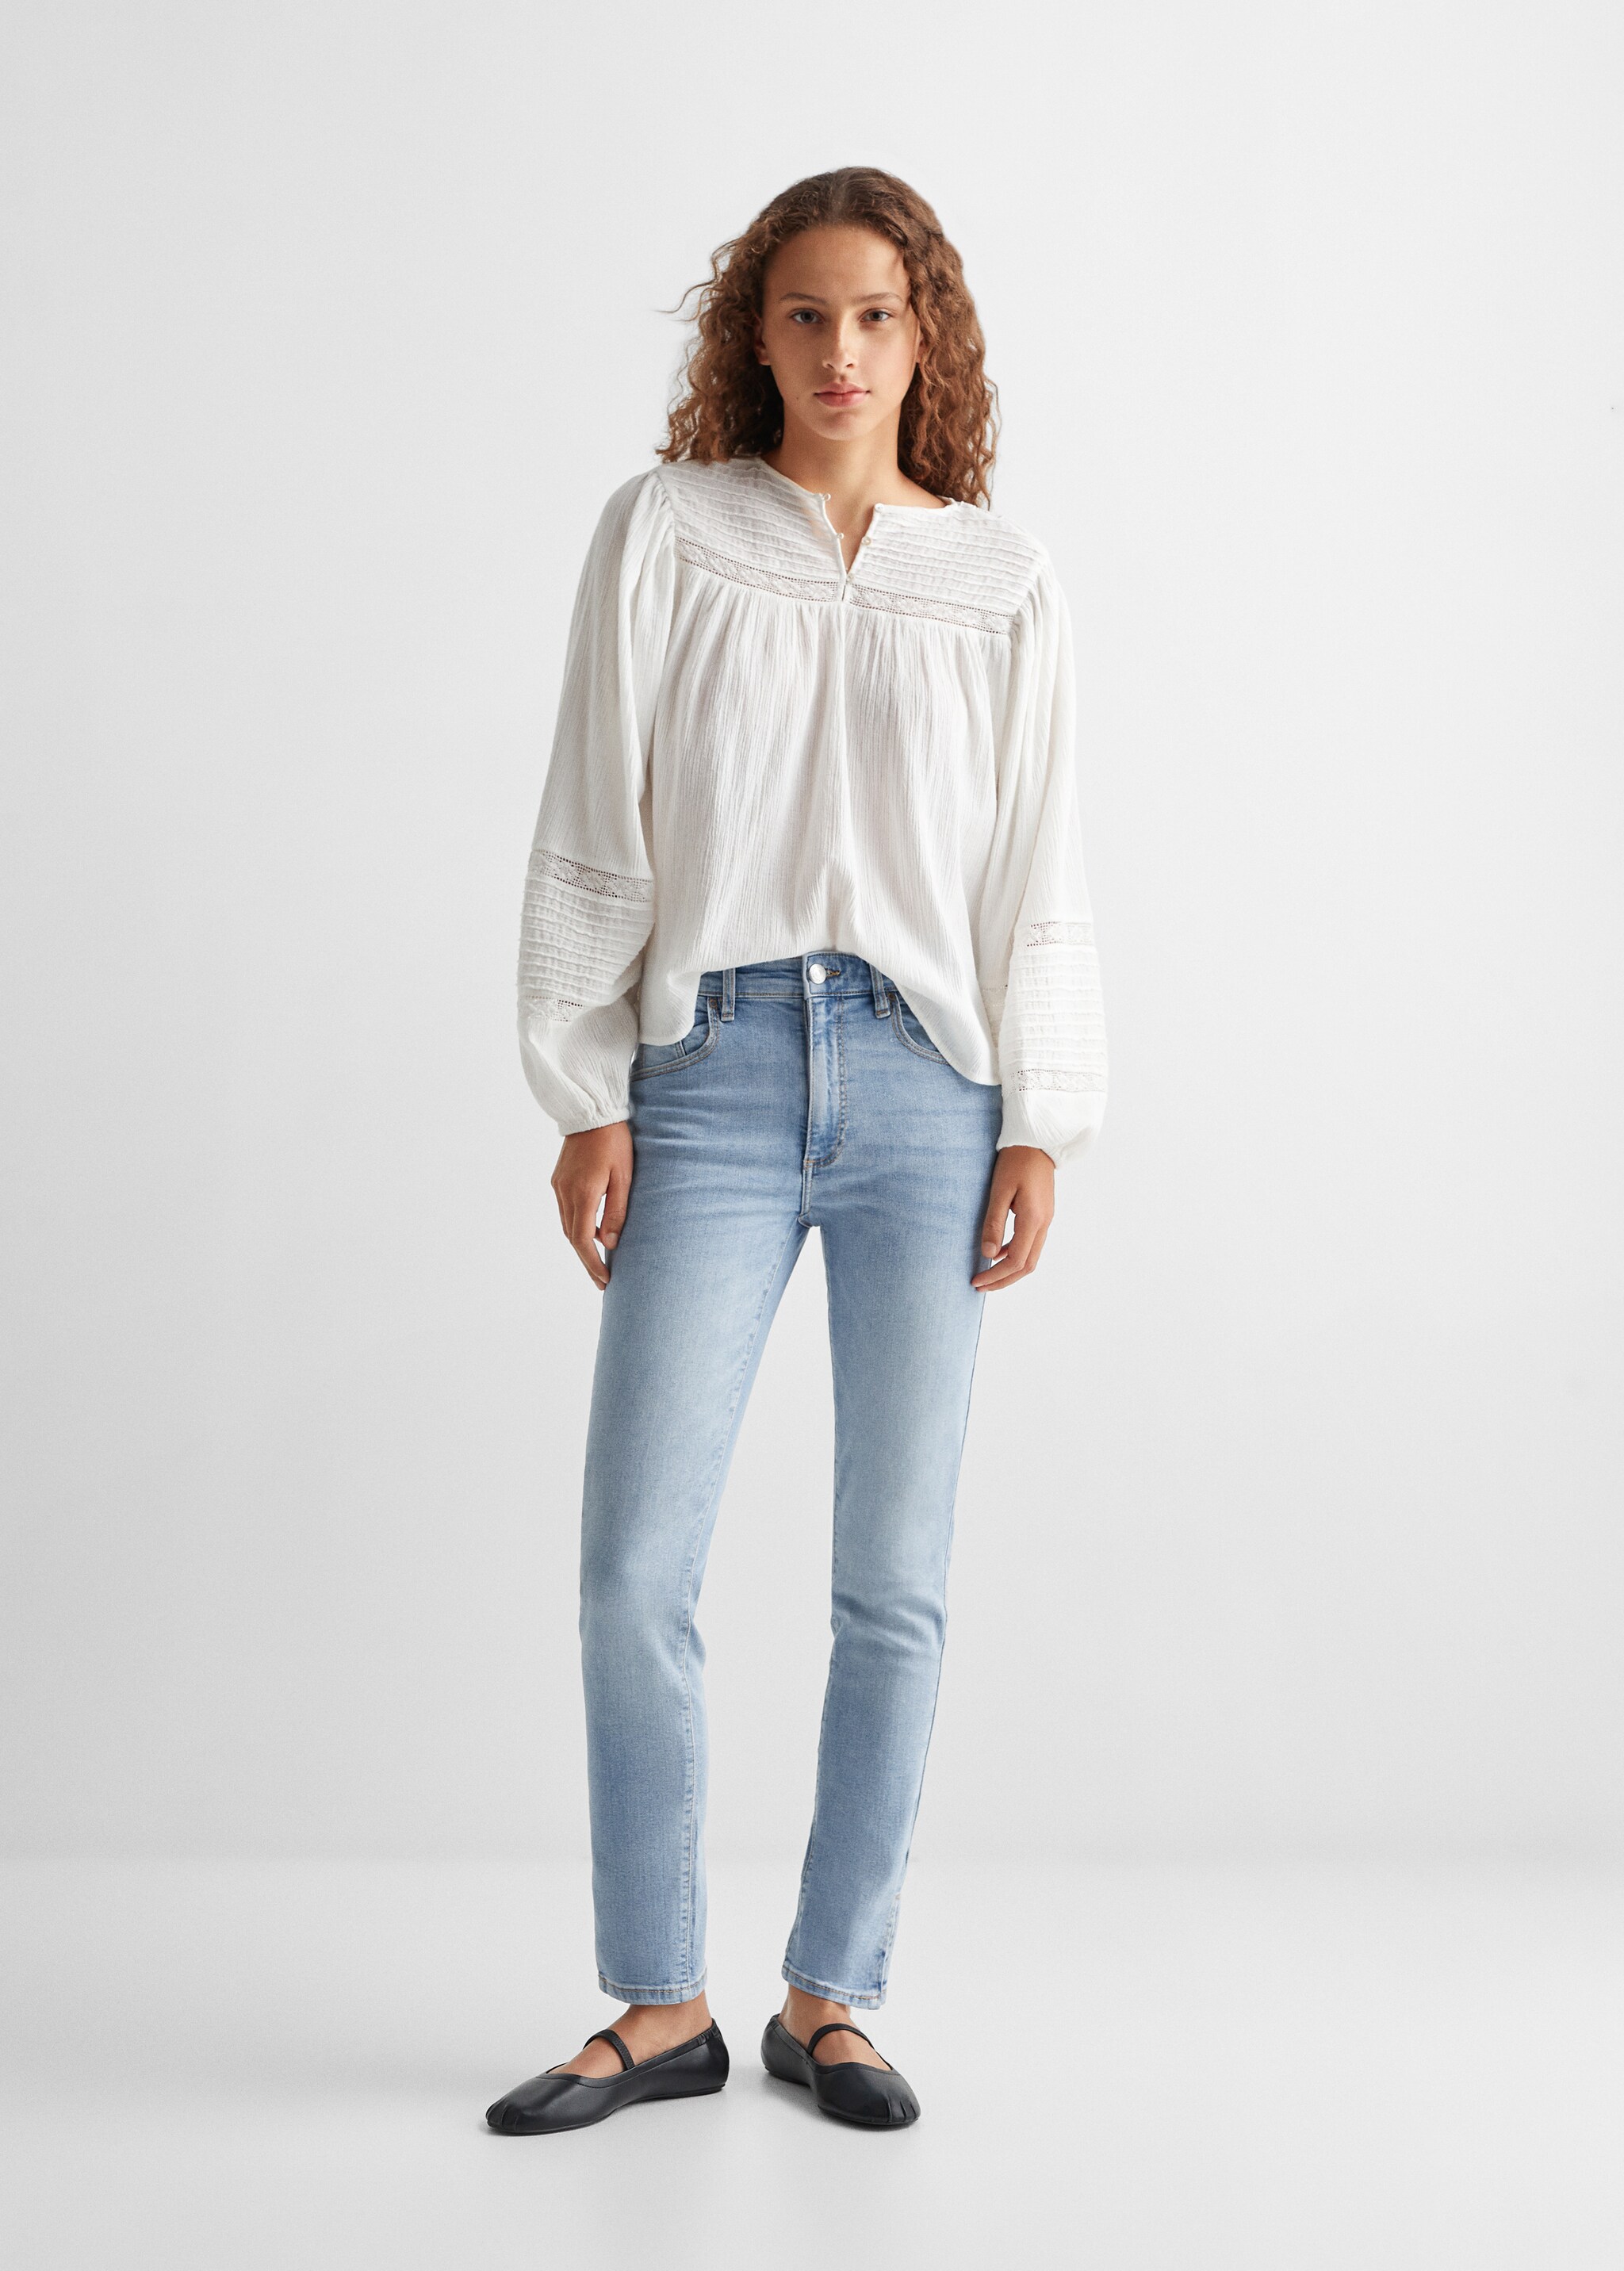 Skinny jeans with slit - General plane